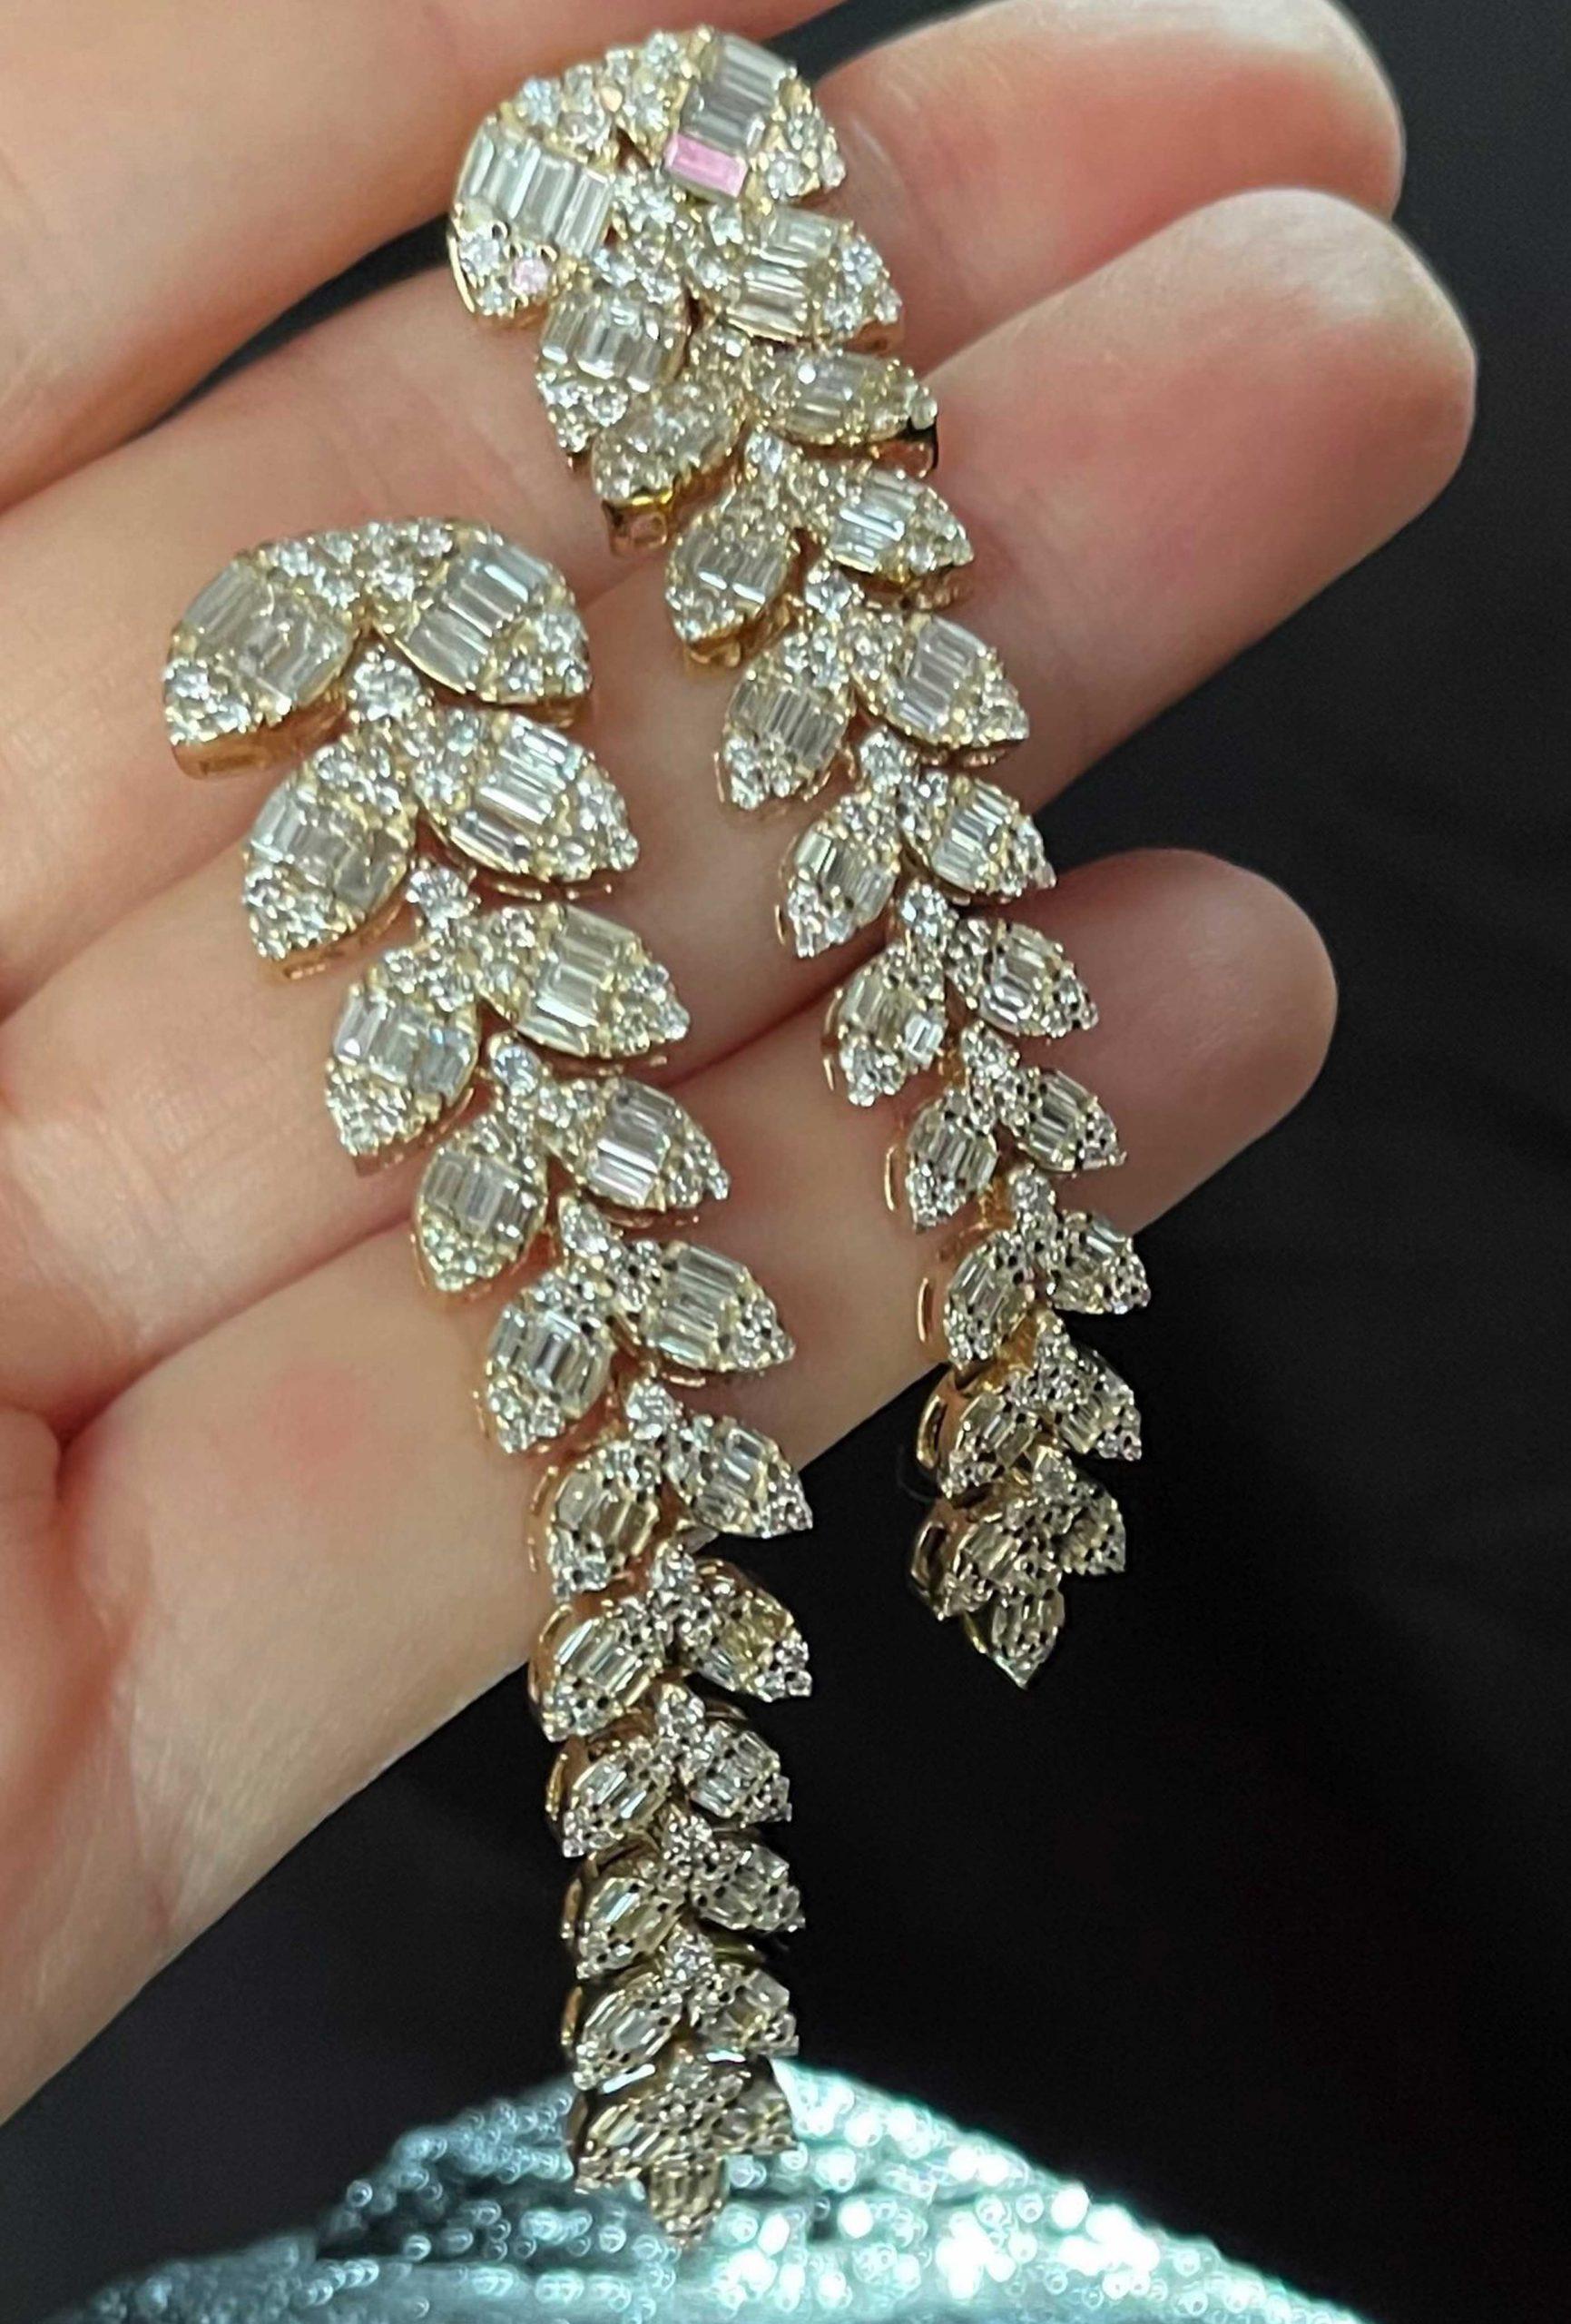 Note: Production time for this product is 4 weeks.

Earring Information
Product name: Small Leaf Long Drop Earrings
Diamond Type : Natural Diamond
Metal : 14K 
Metal Color : Yellow gold
Diamond Carat Weight : 6.03ttcw

Radiate ethereal and glamorous